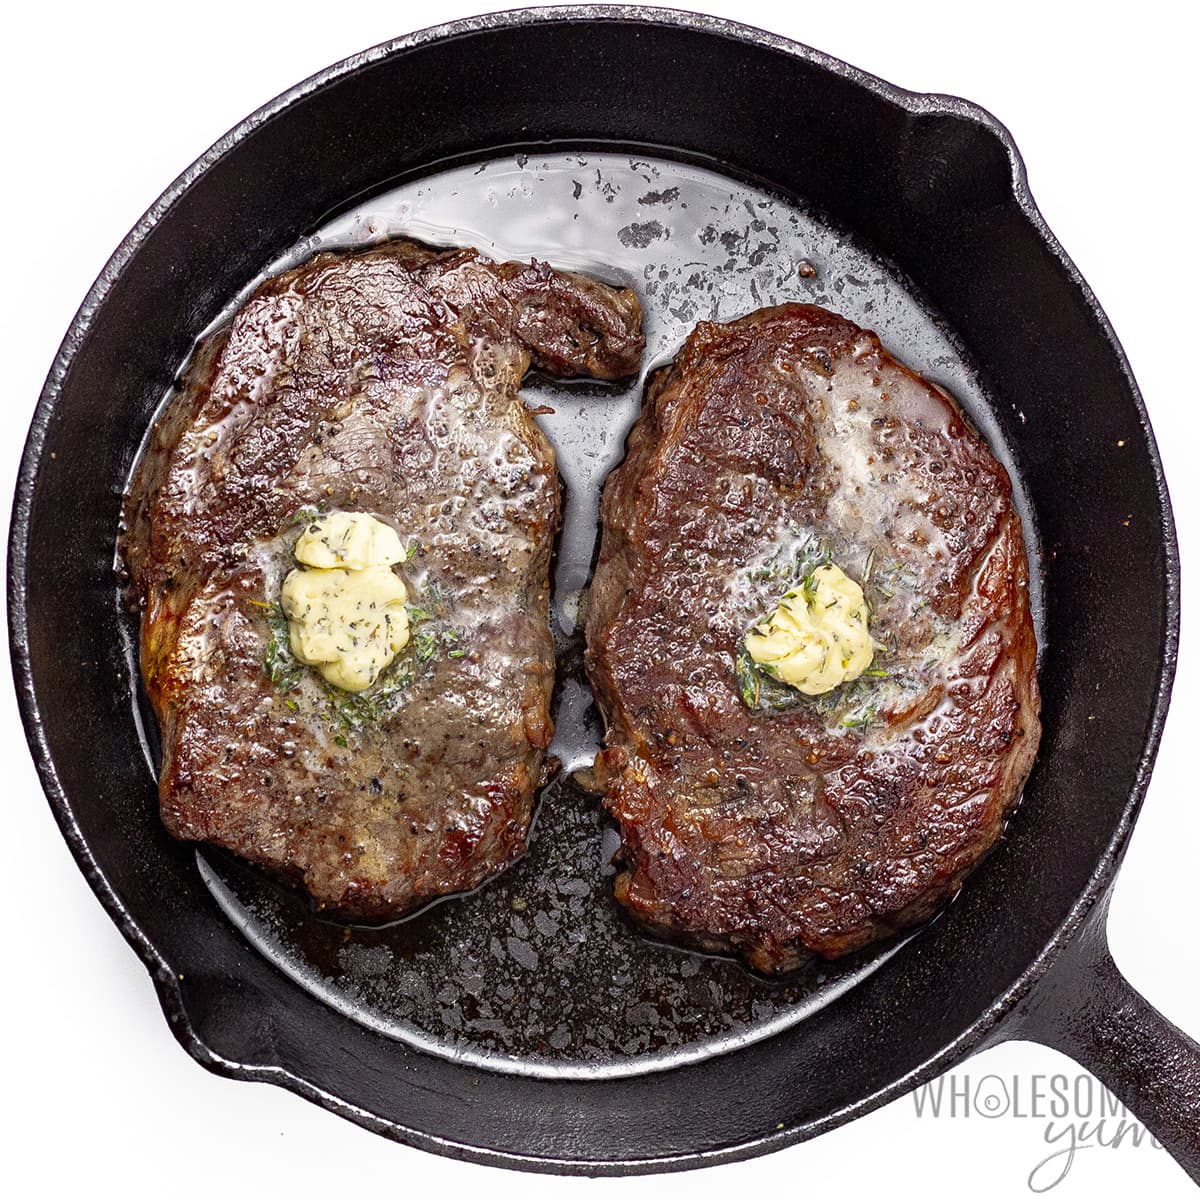 Chuck's eye steak topped with butter.